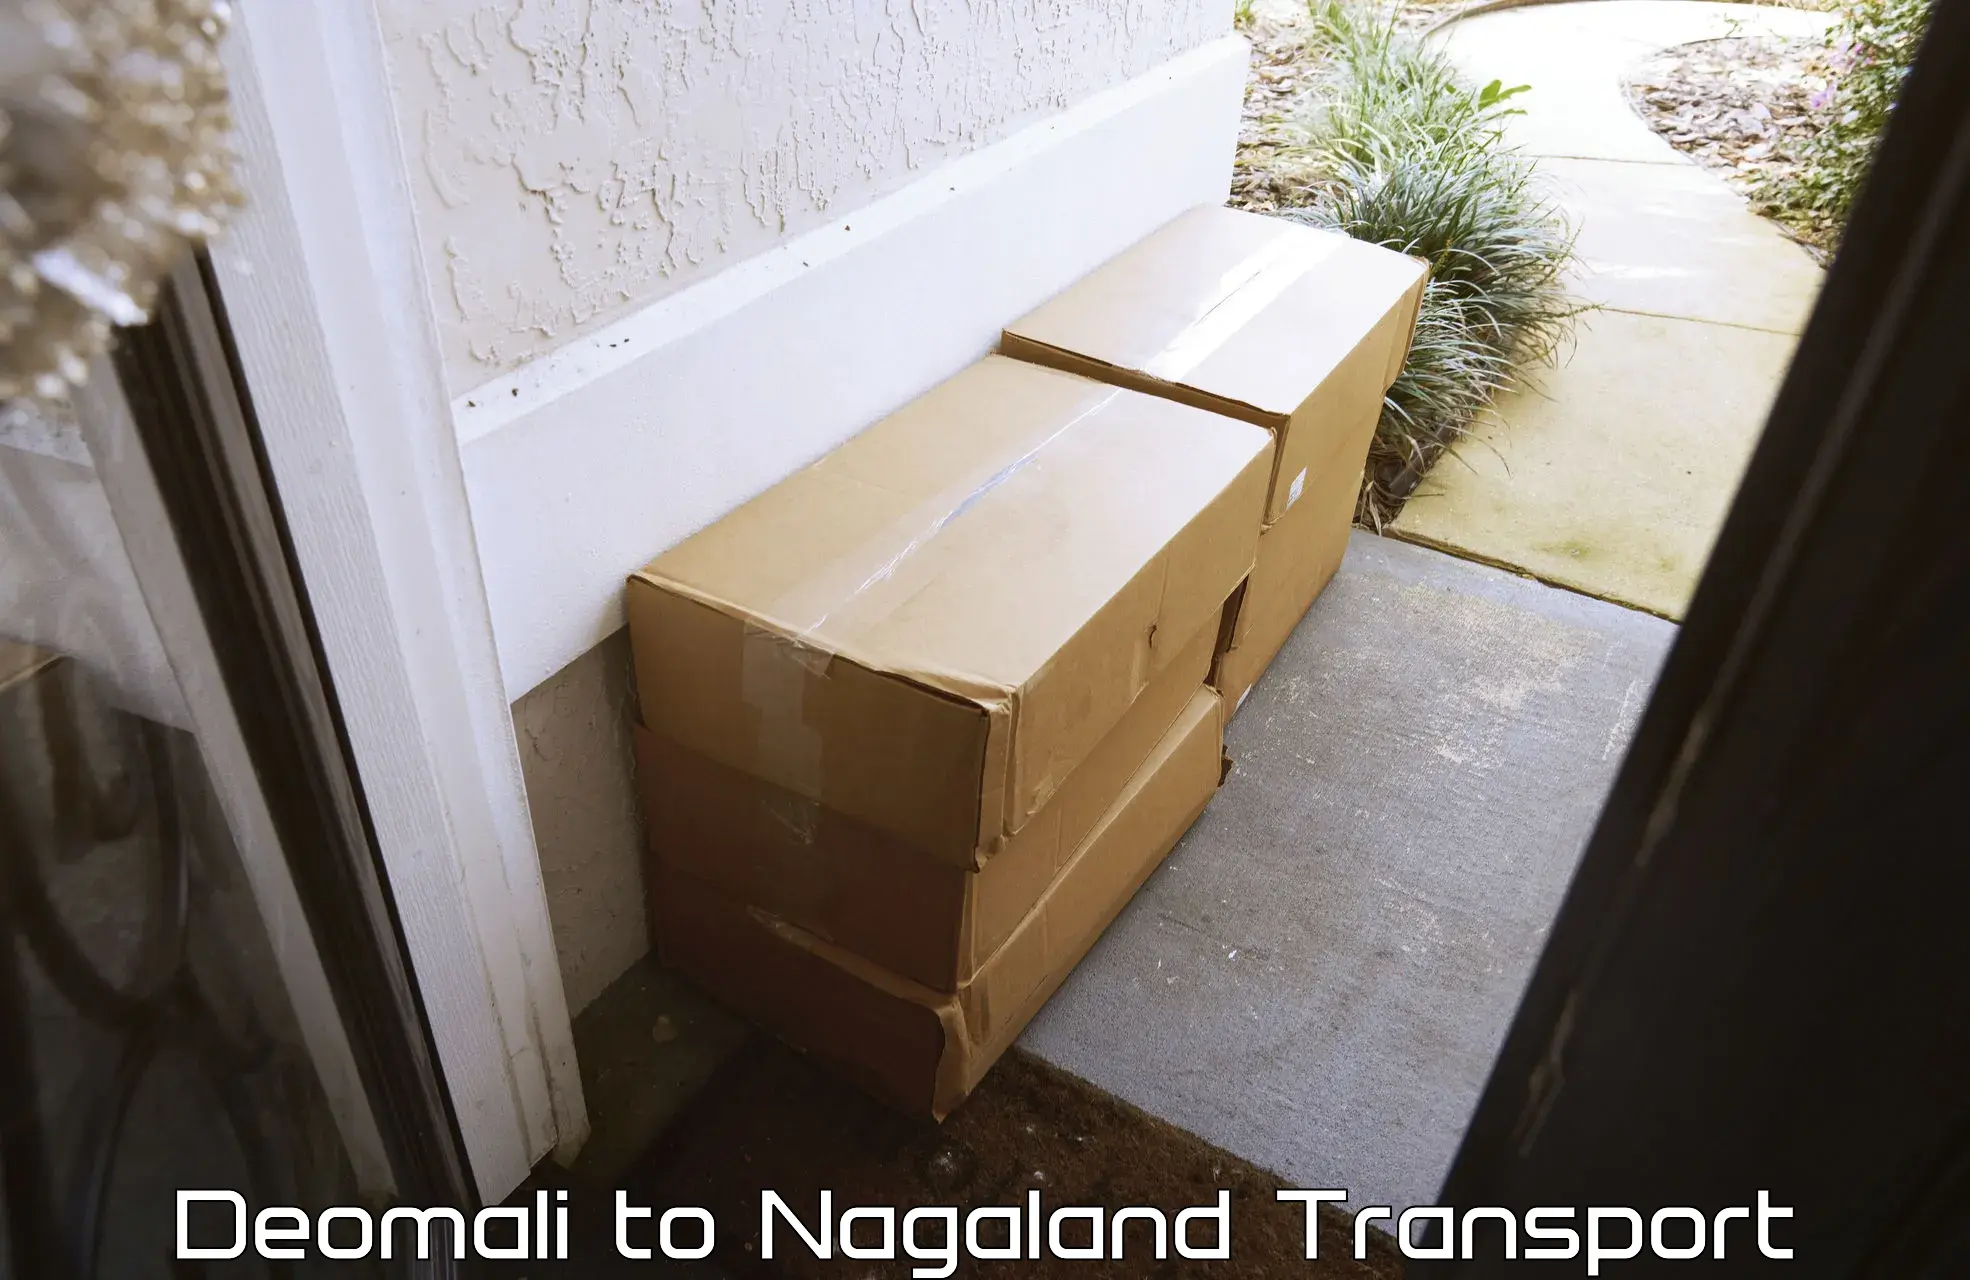 Container transport service Deomali to Nagaland